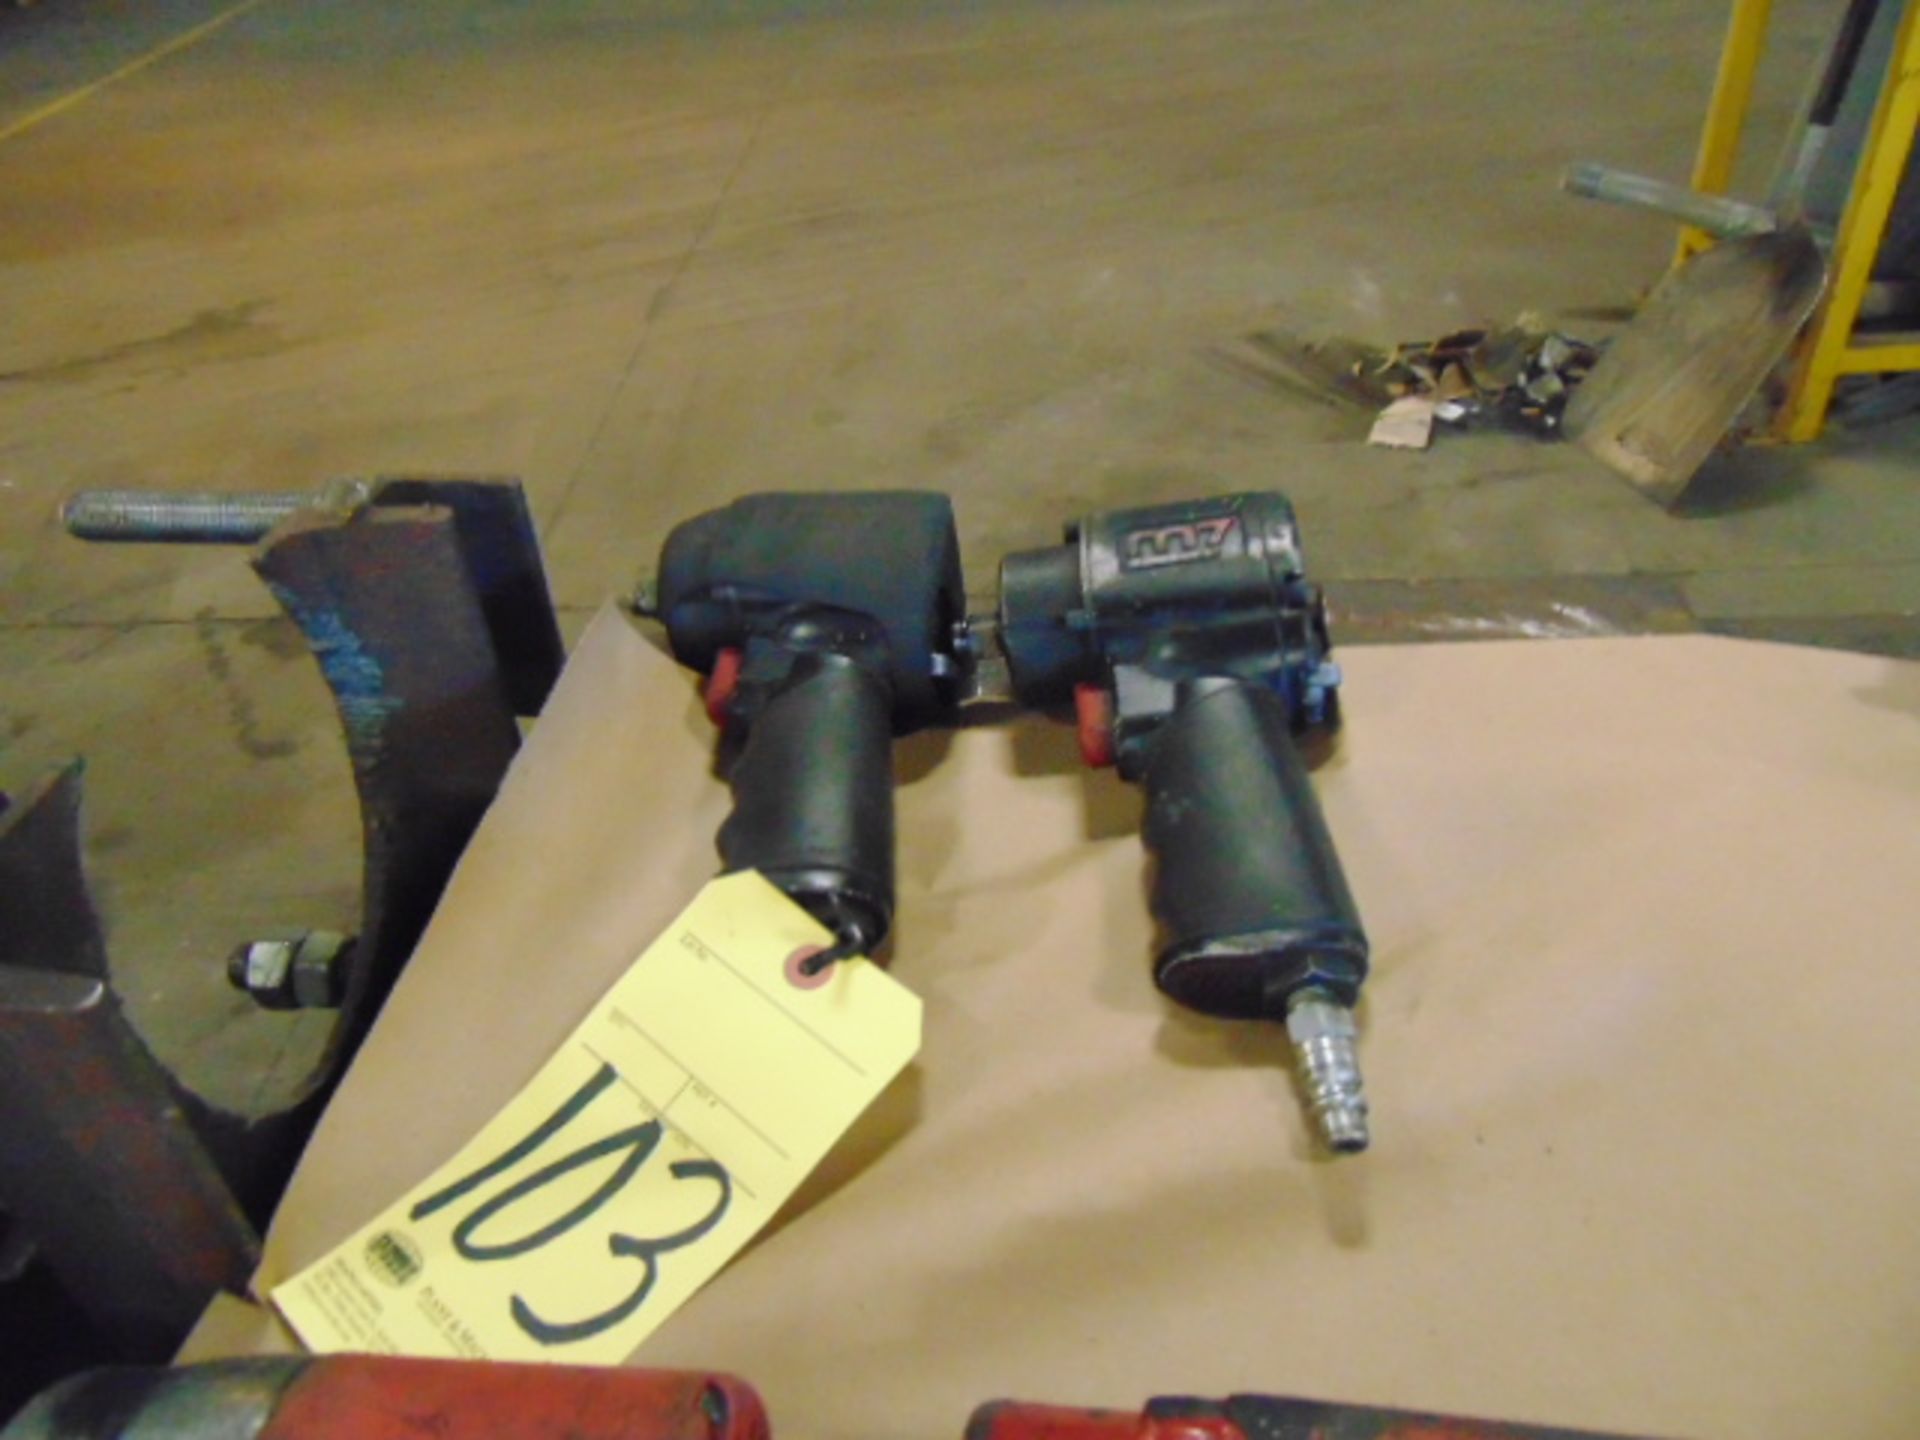 LOT OF PNEUMATIC IMPACT WRENCHES (2)